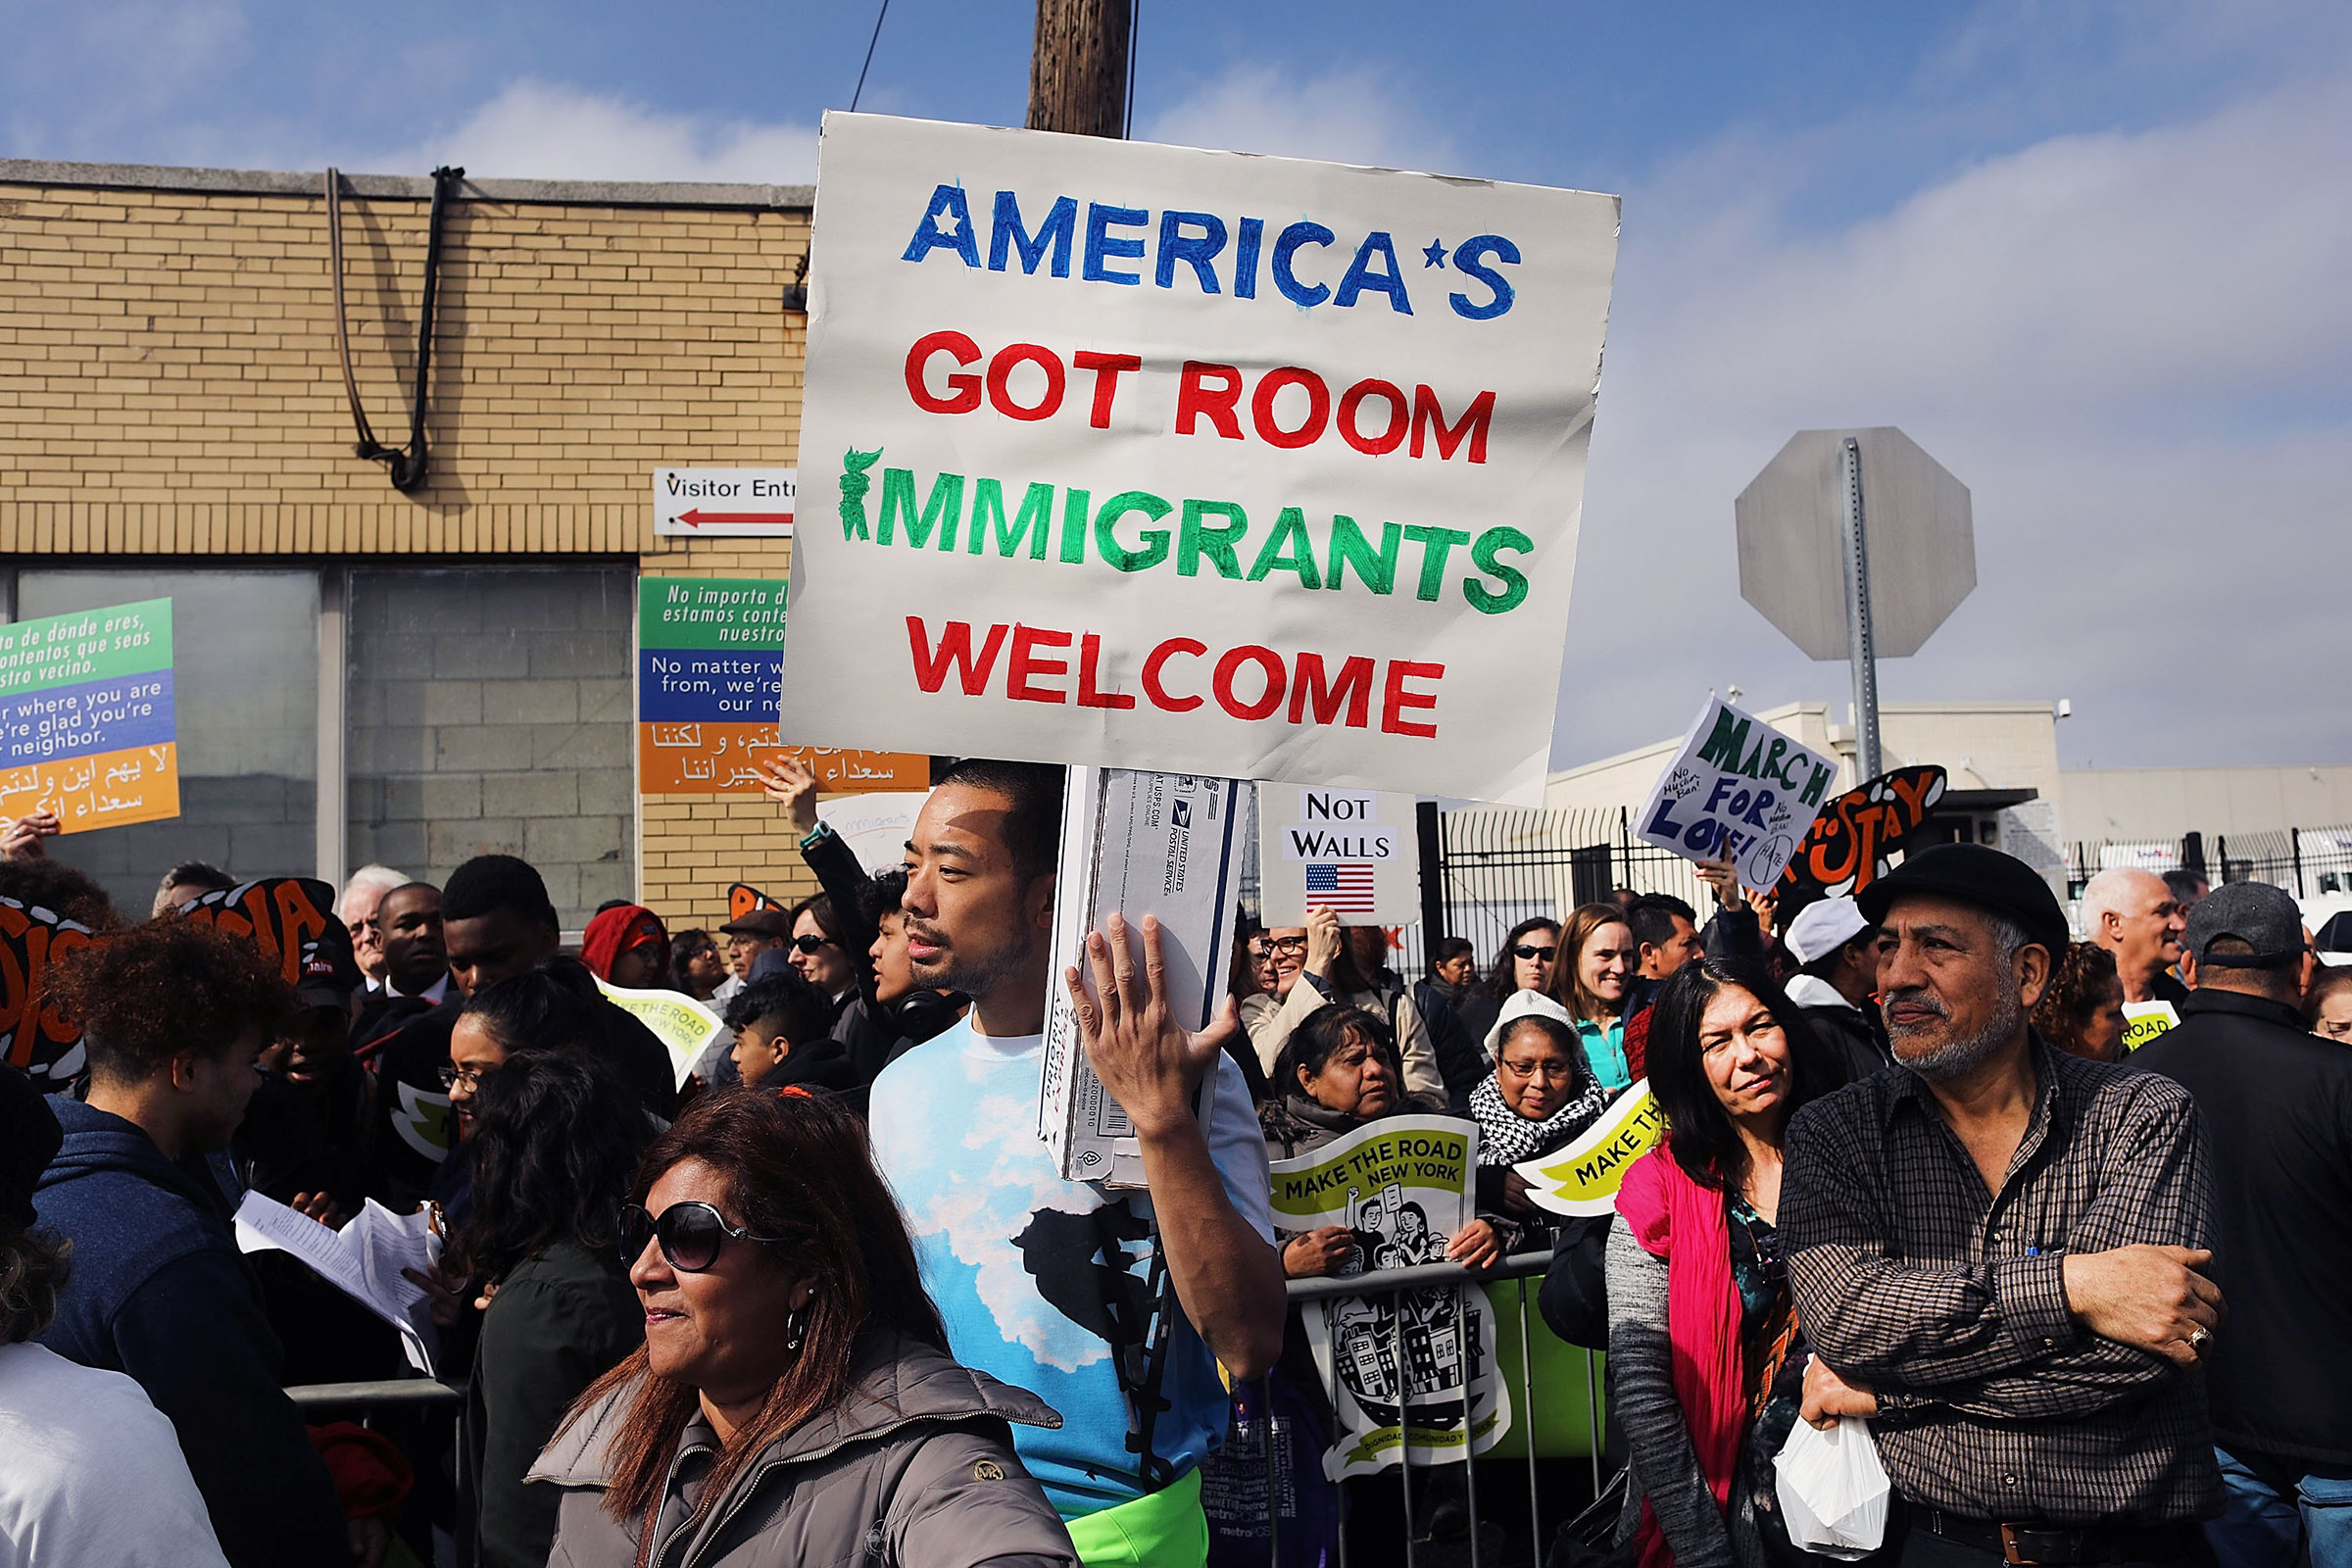 A man holds a sign reading "AMERICA'S GOT ROOM; IMMIGRANTS WELCOME" during an outdoor protest